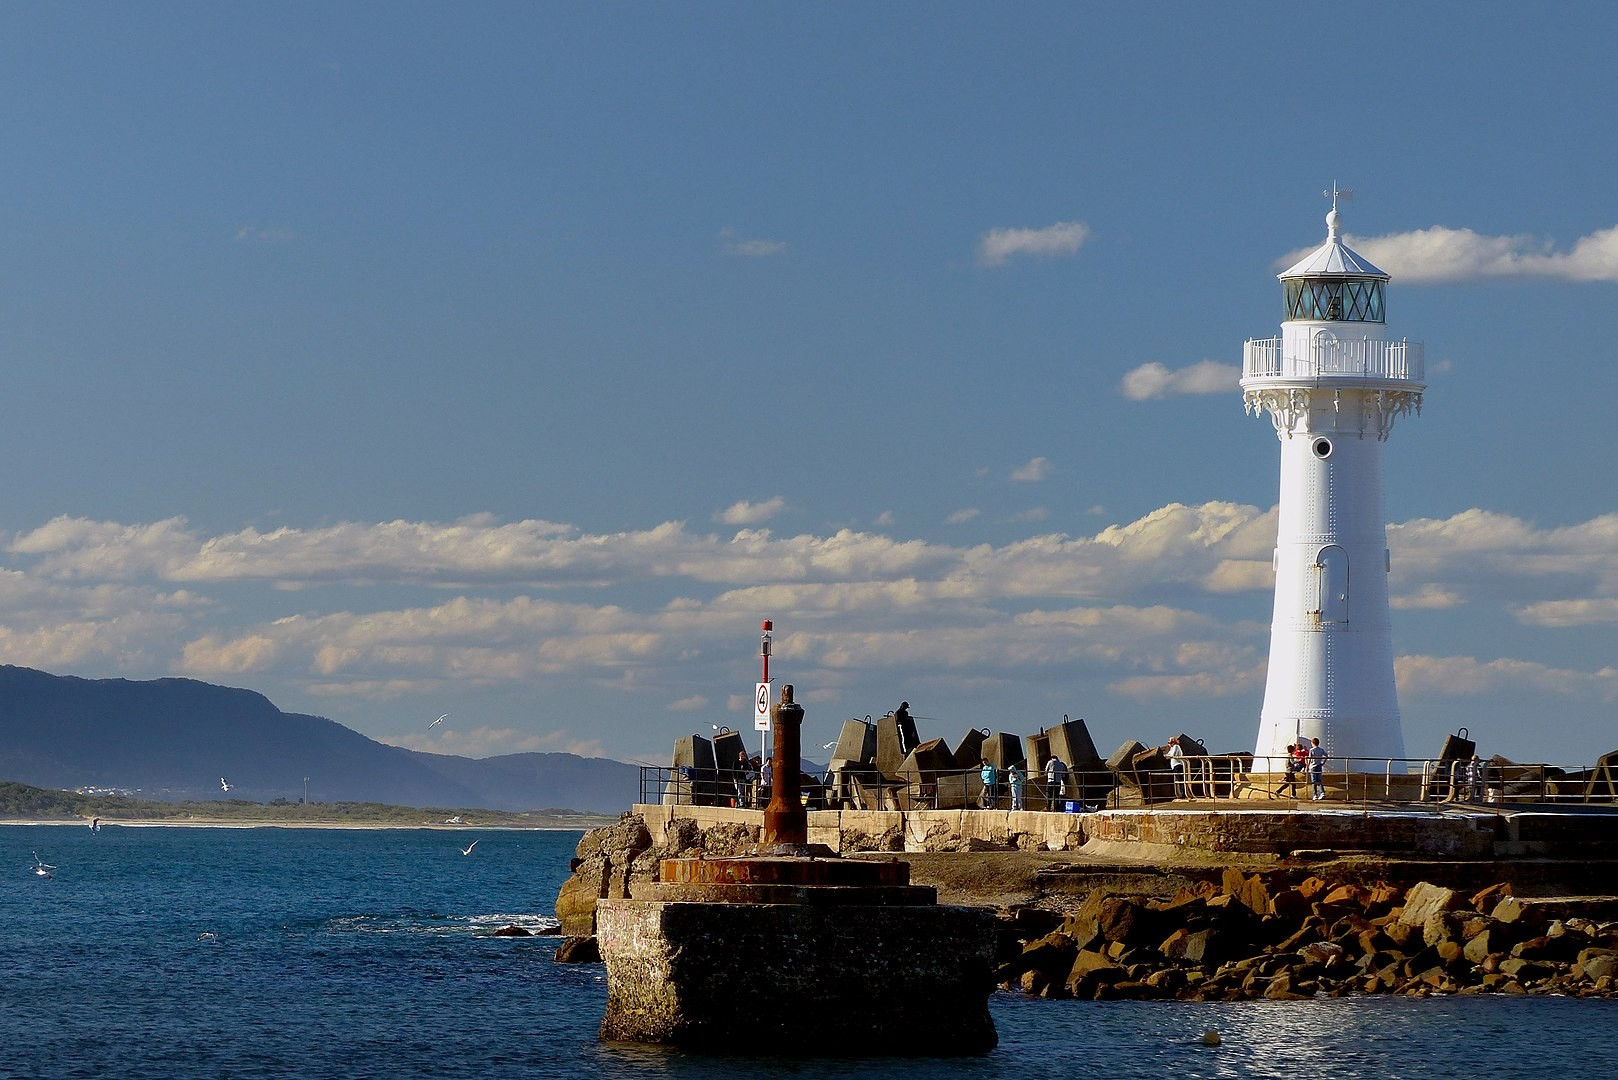 By Bernard Spragg. NZ from Christchurch, New Zealand - Wollongong Breakwater Lighthouse, CC0, https://commons.wikimedia.org/w/index.php?curid=54995203